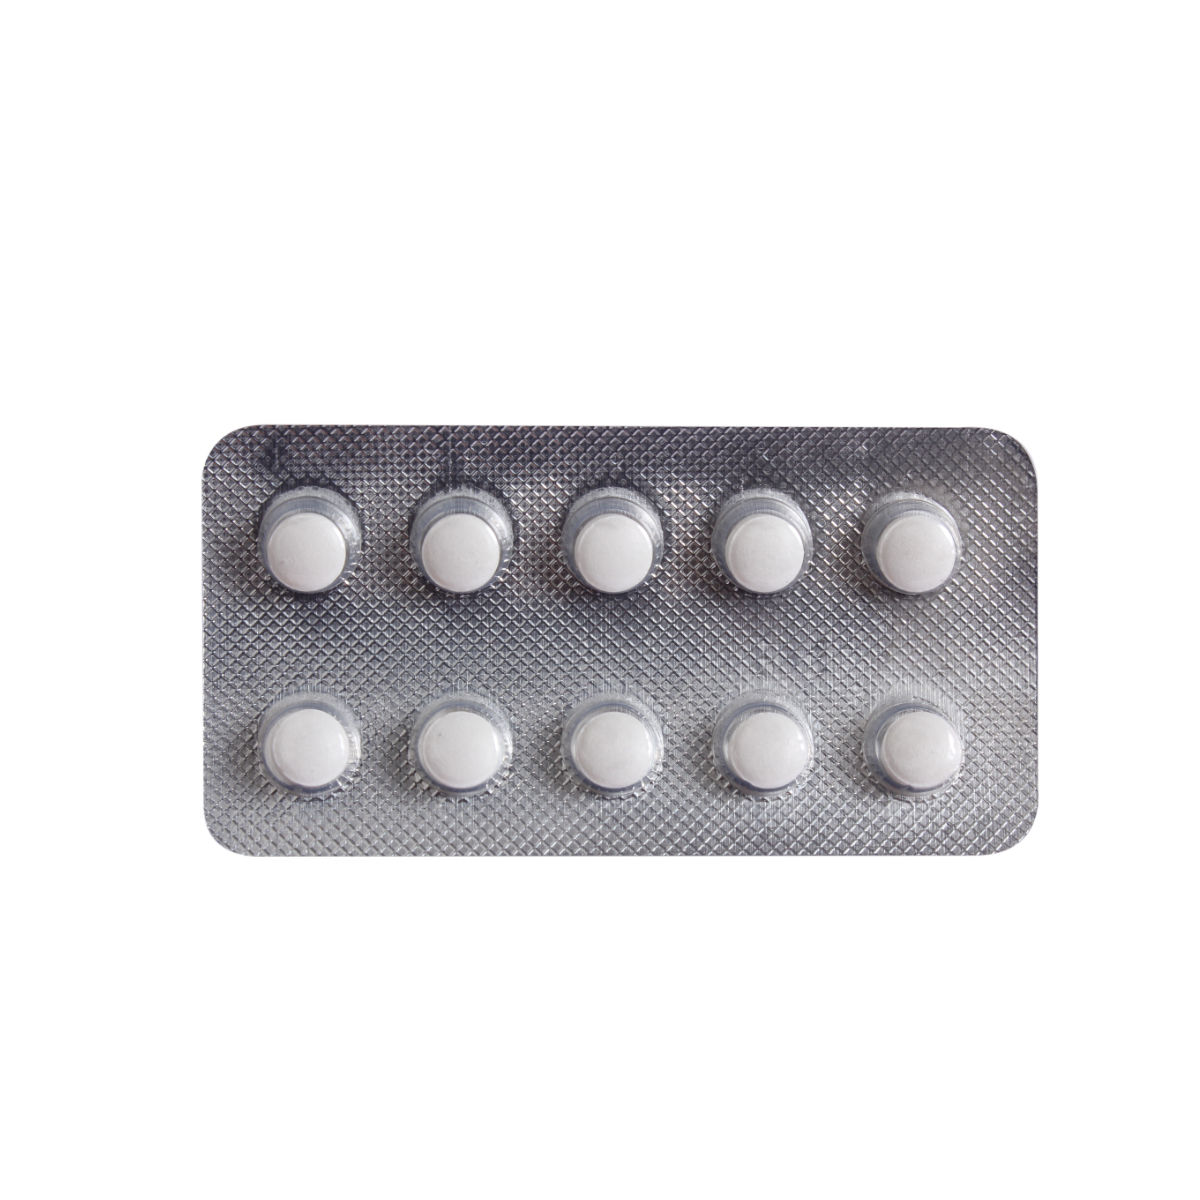 Styptin-CR 10 mg Tablet 10's, Pack of 10 TABLETS